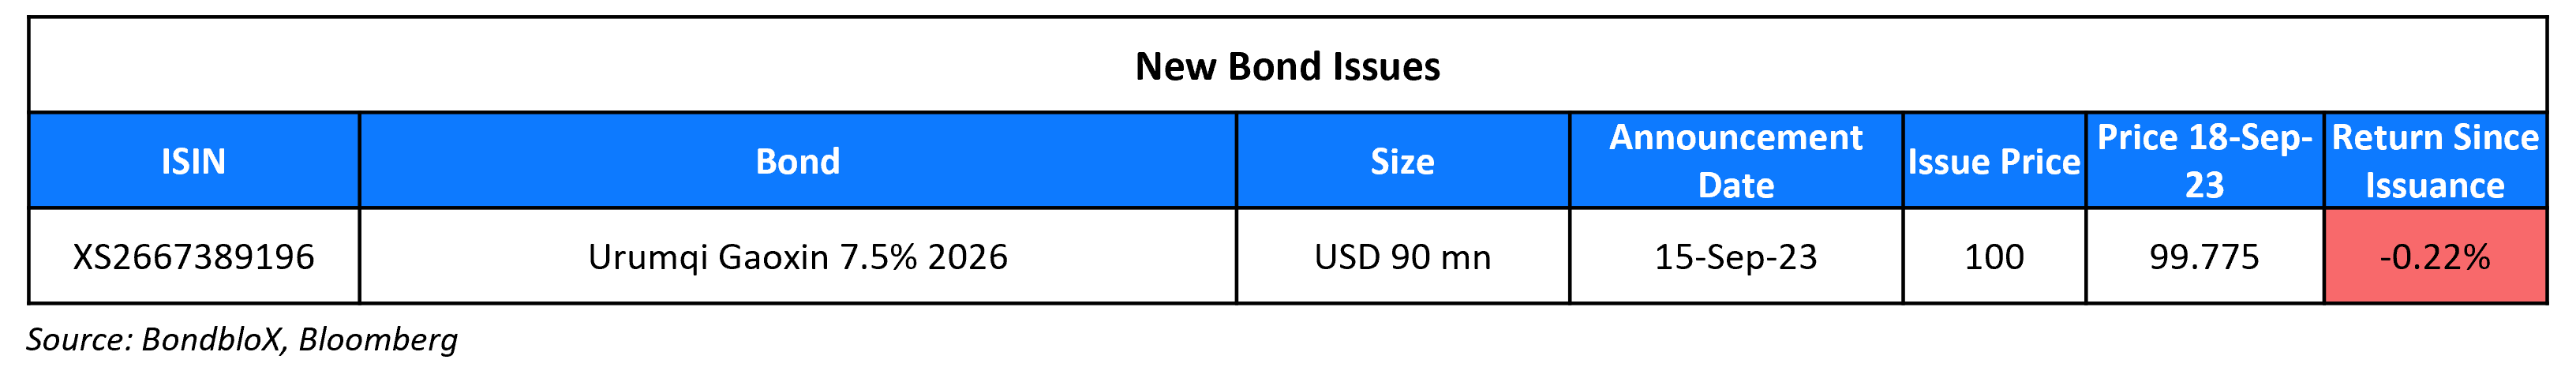 New Bond Issues 18 Sep 23